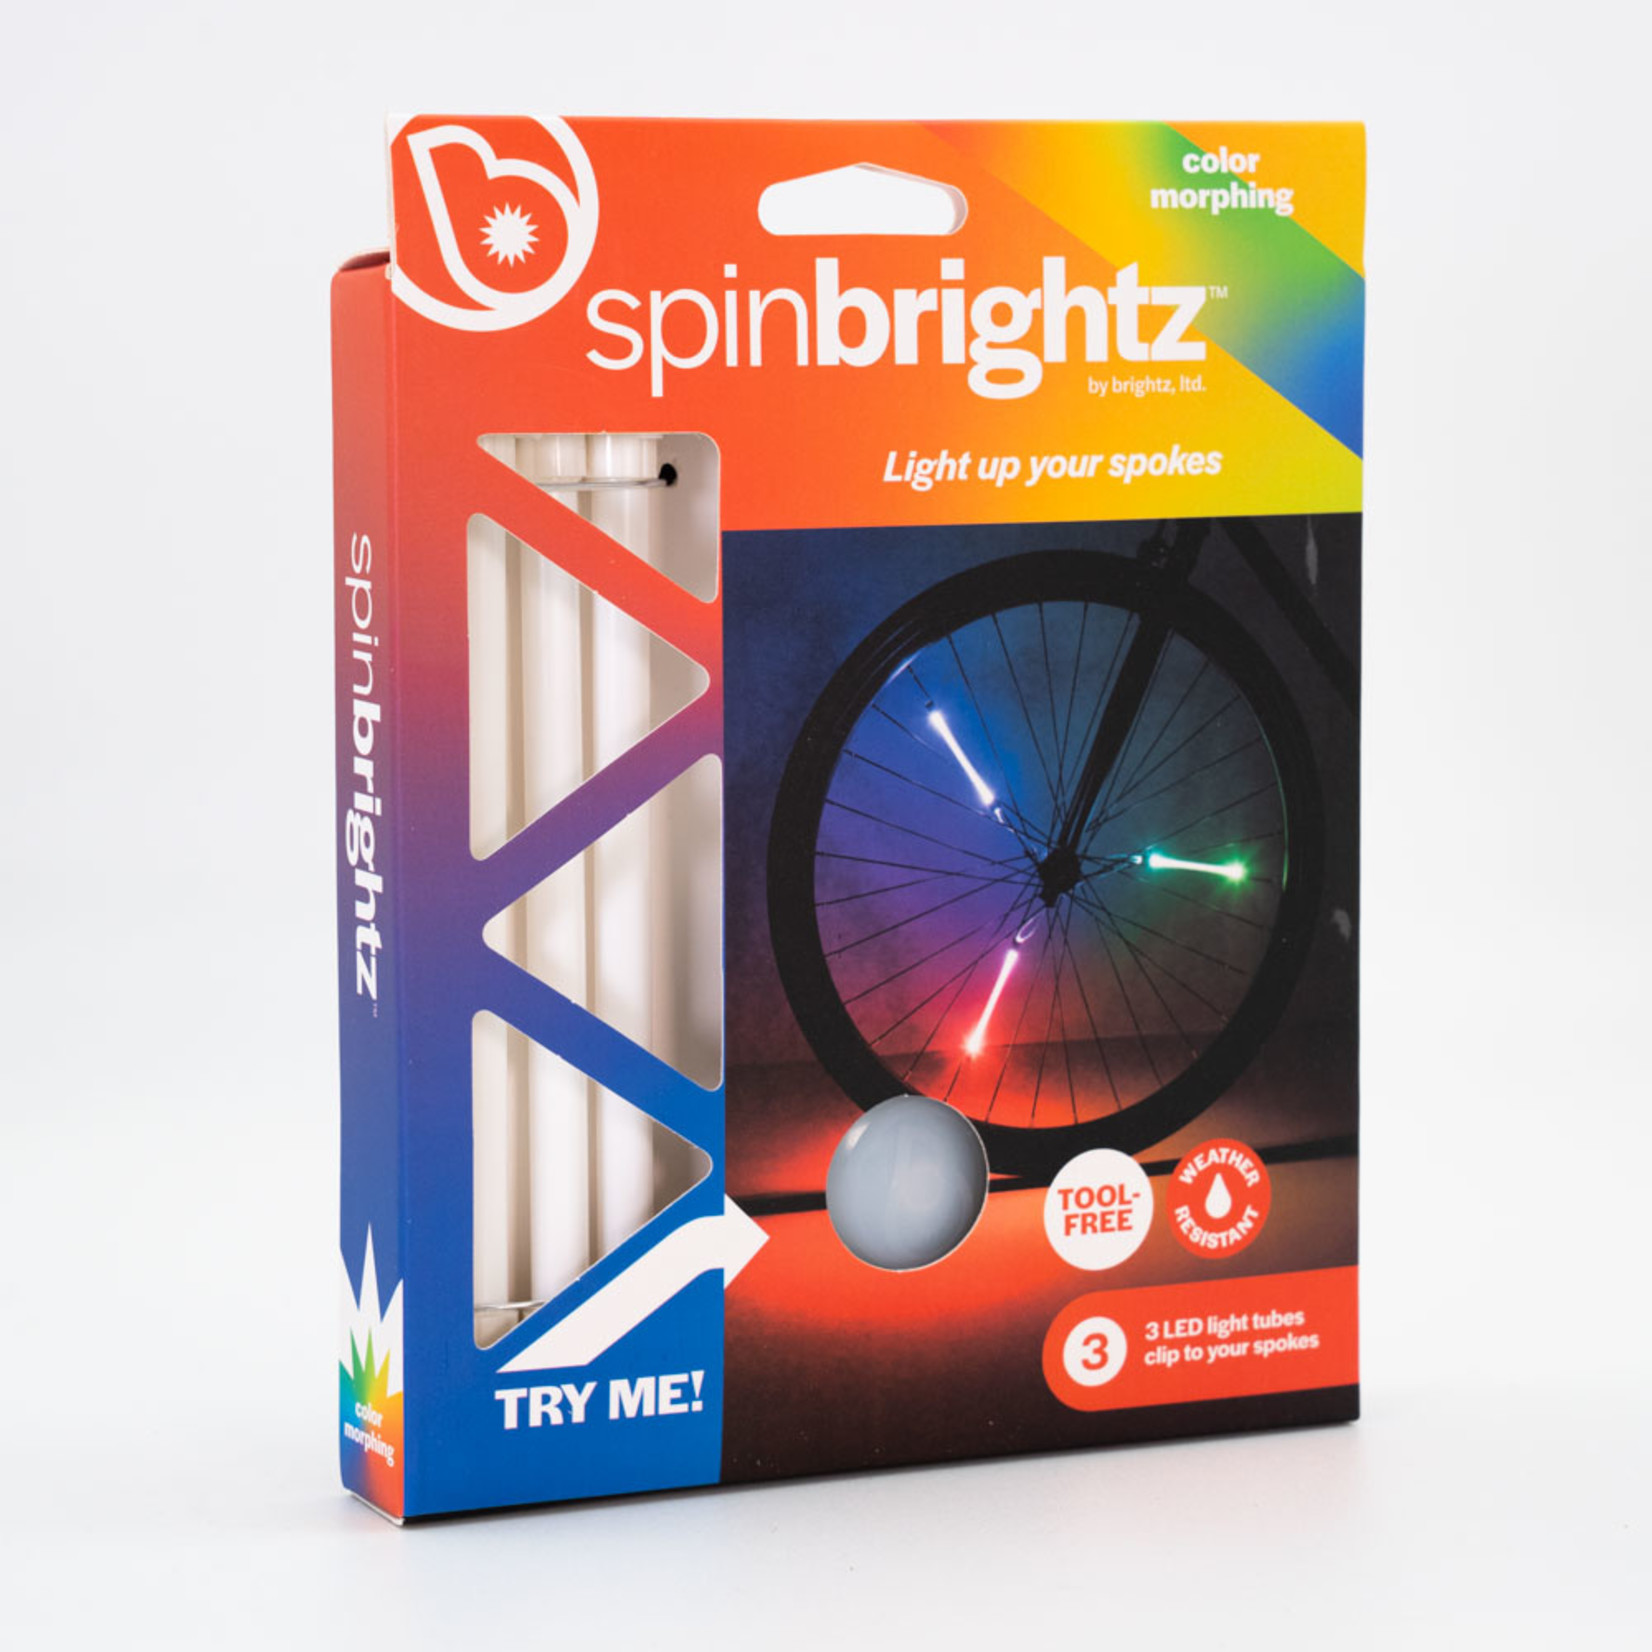 Spin Brightz Color Morphing Bike Lights